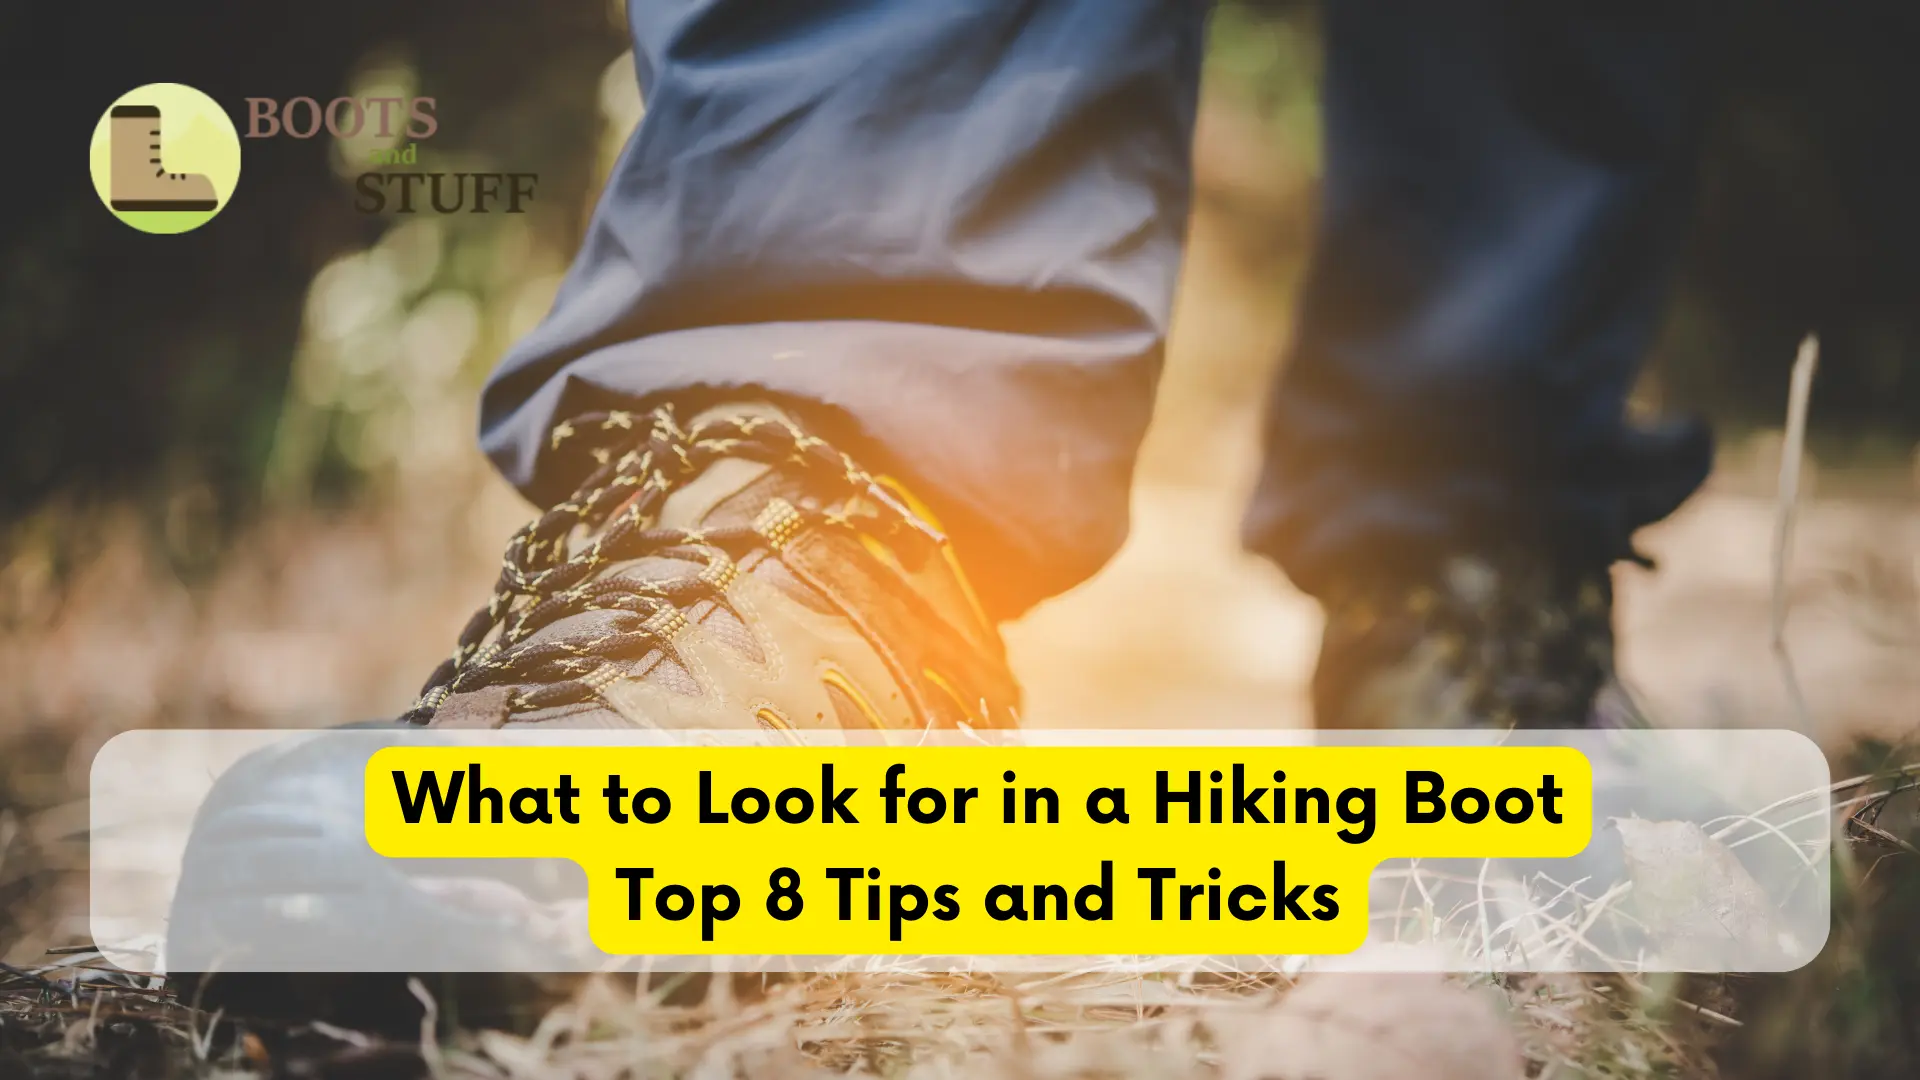 What to Look for in a Hiking Boot- Top 8 Tips and Tricks Blog Cover Image